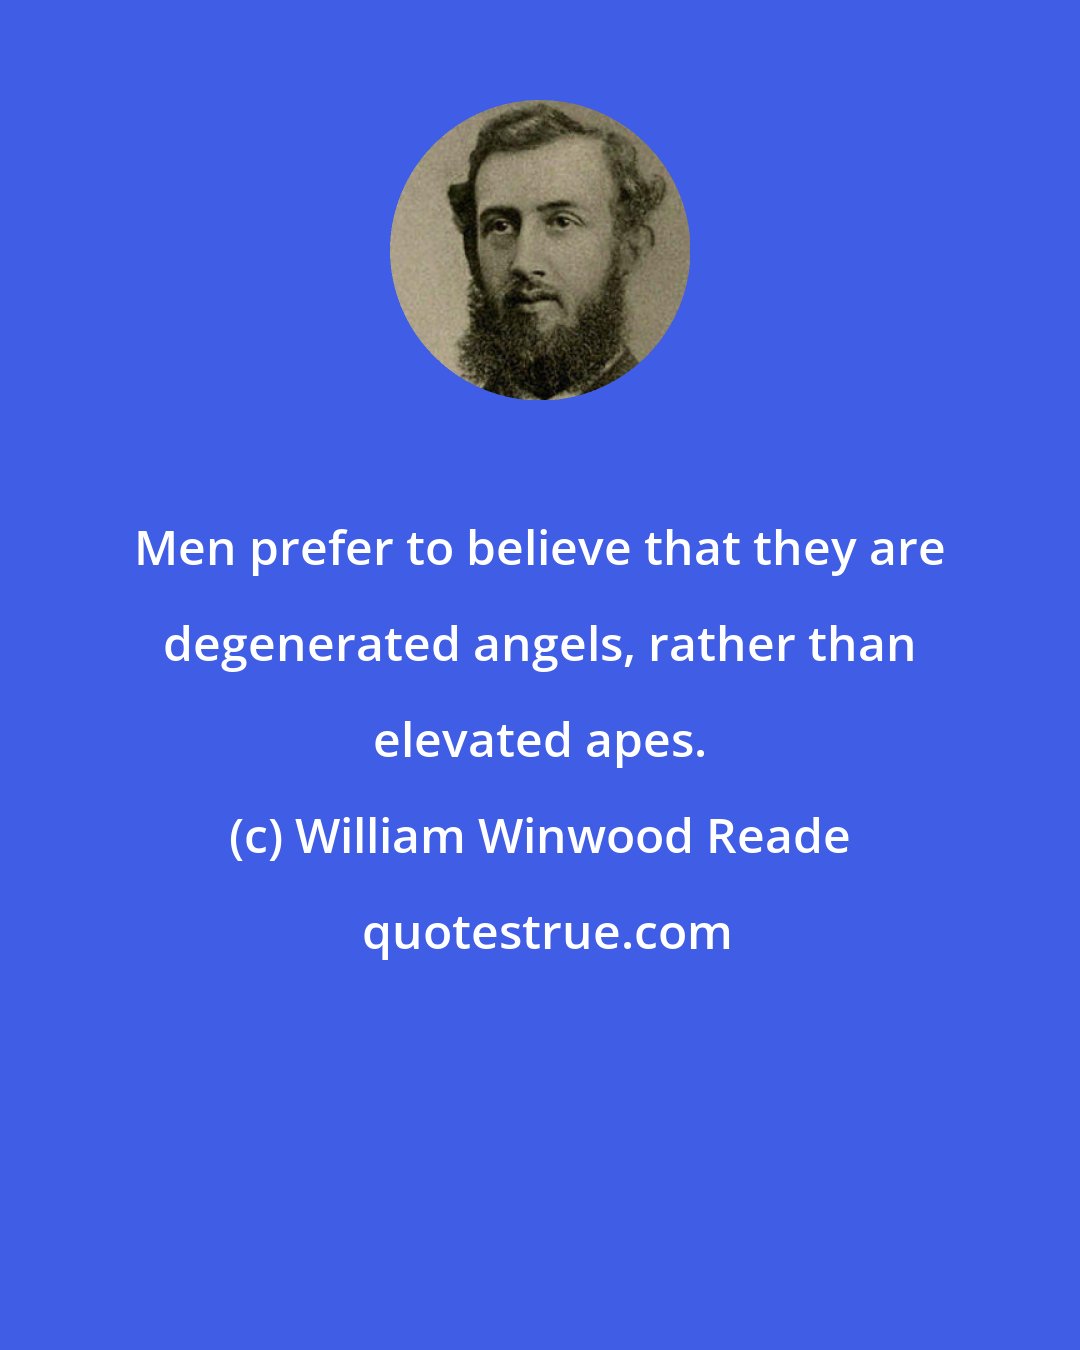 William Winwood Reade: Men prefer to believe that they are degenerated angels, rather than elevated apes.